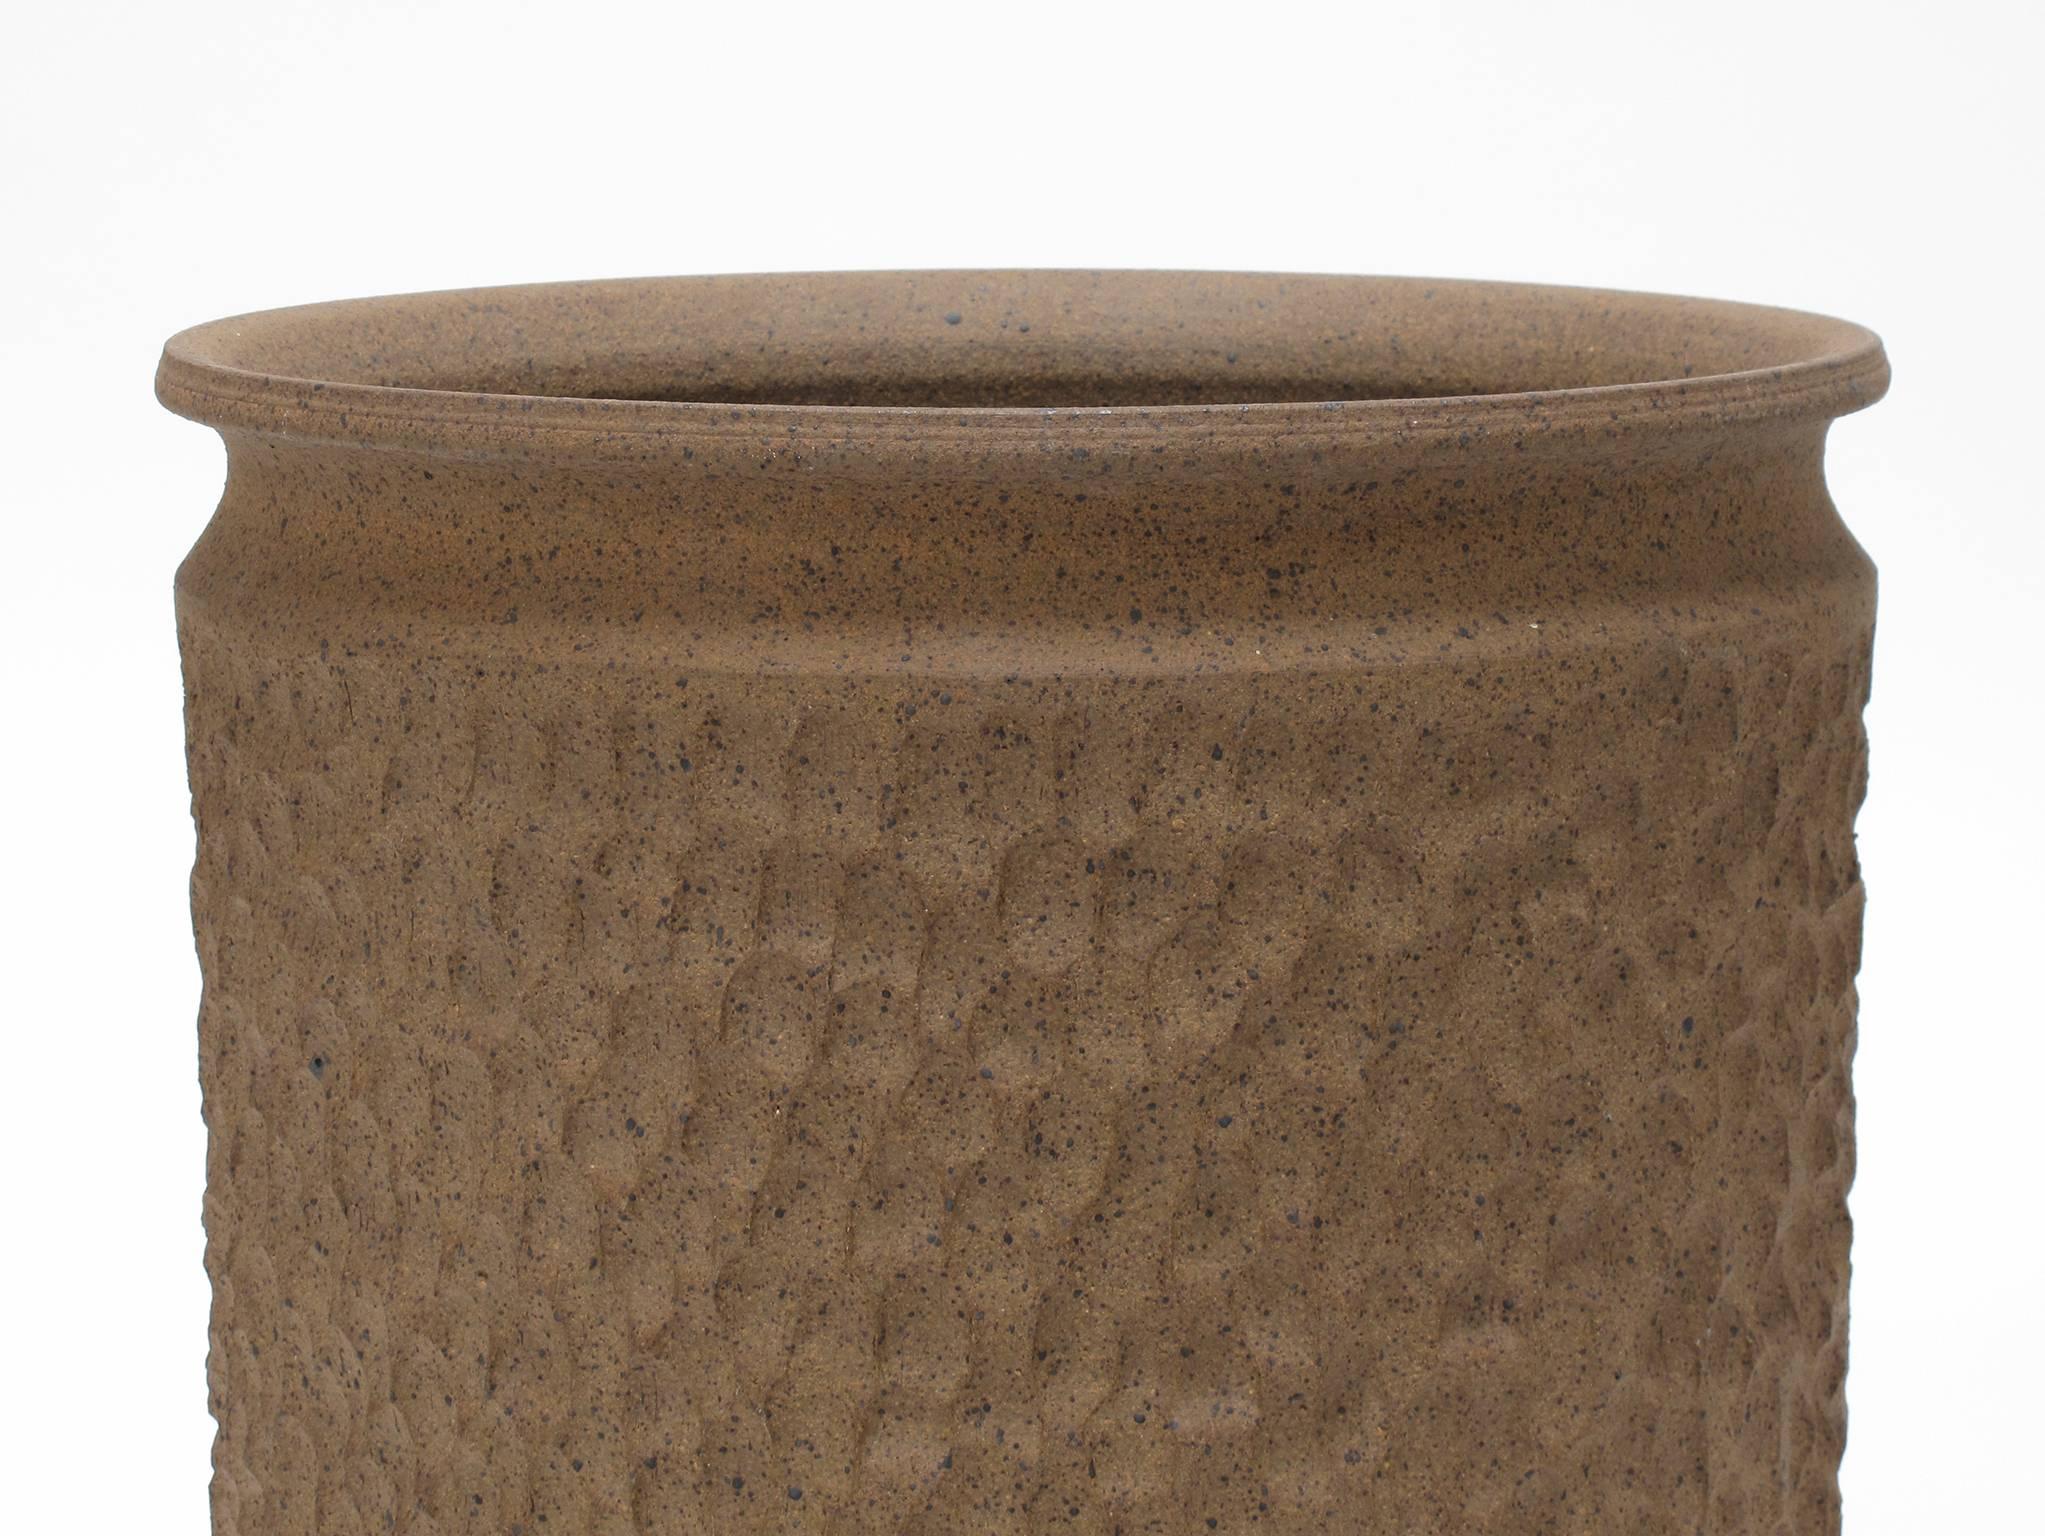 Hand-Crafted David Cressey & Robert Maxwell 'Pebble' Design Earthgender Ceramic Planter 1970s For Sale